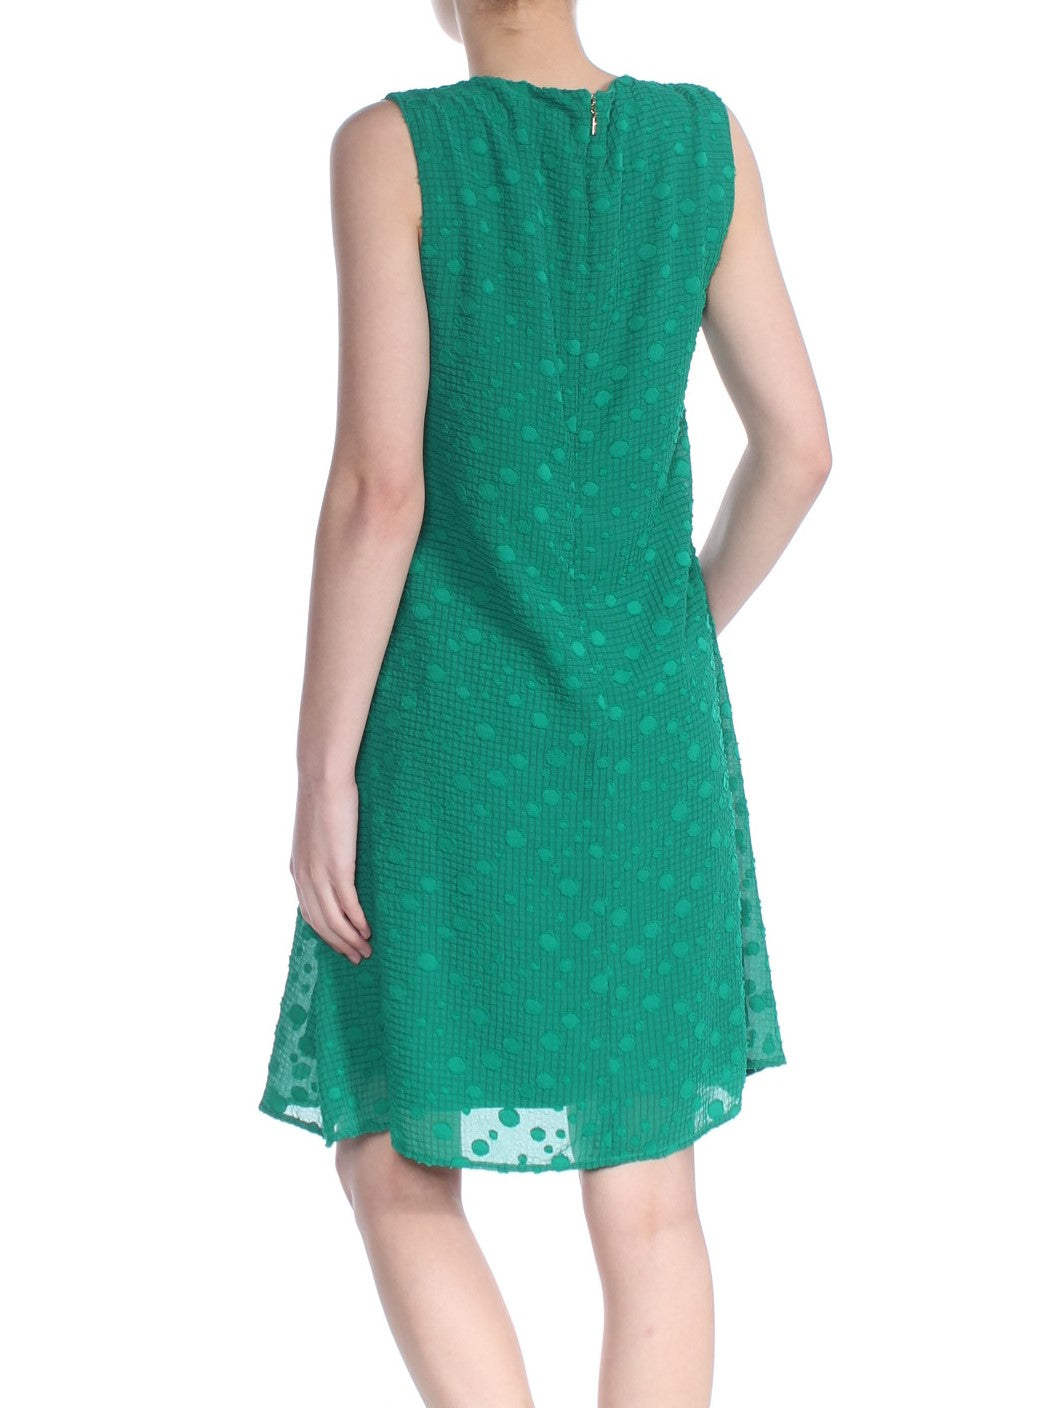 DKNY Womens Green Lace Textured Polka Dot Sleeveless Square Neck Above The Knee Cocktail Fit + Flare Dress